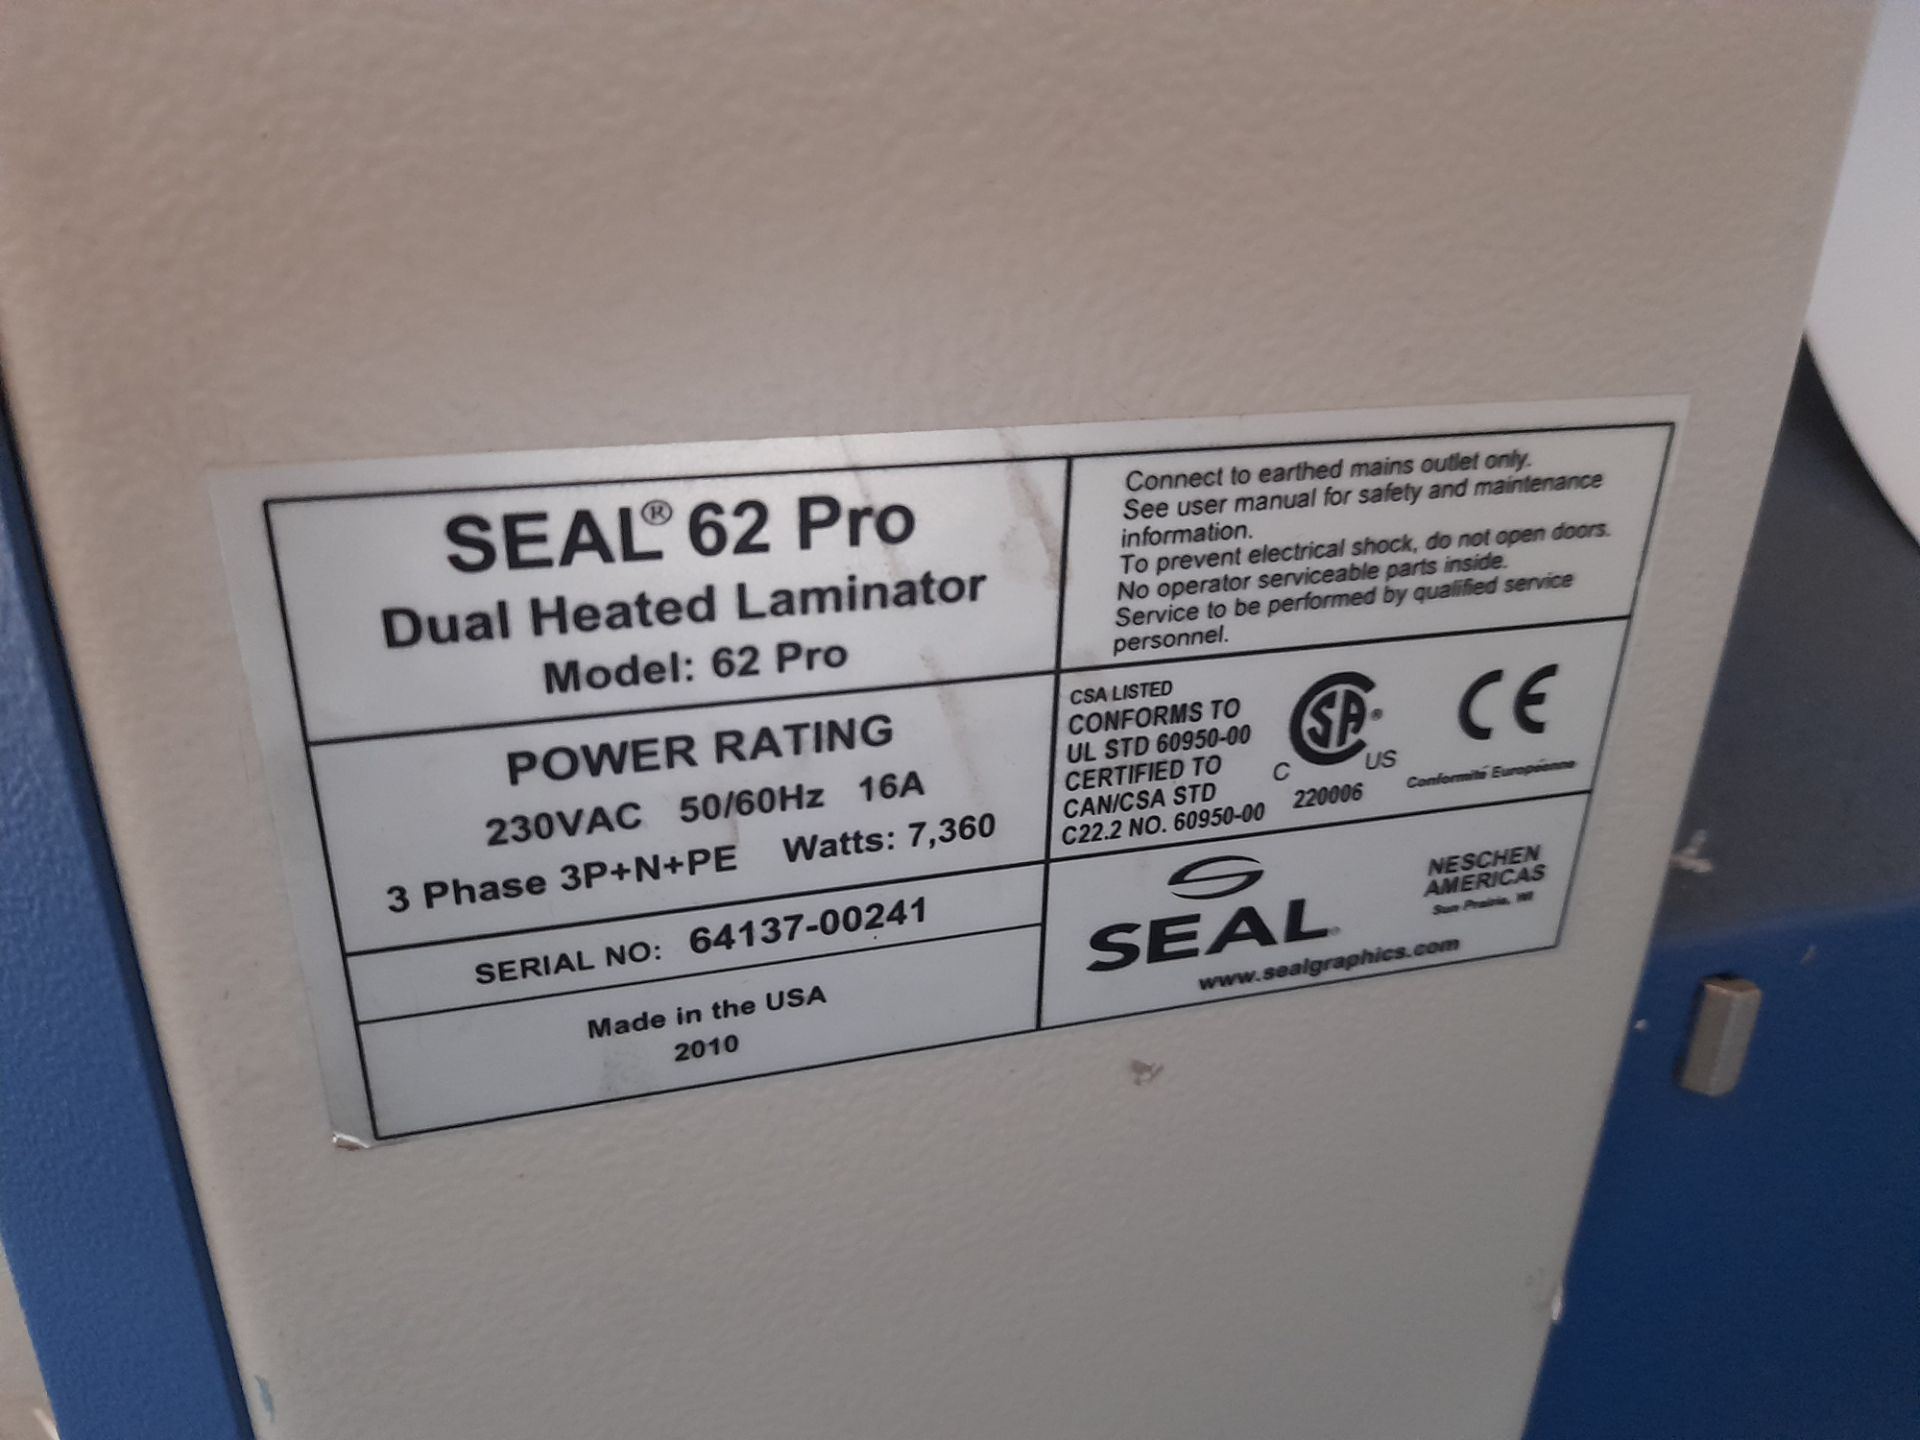 Seal 62 Pro Dual Heated Laminator, three phase, serial number 64137-00241, year of manufacture 2010, - Image 5 of 9